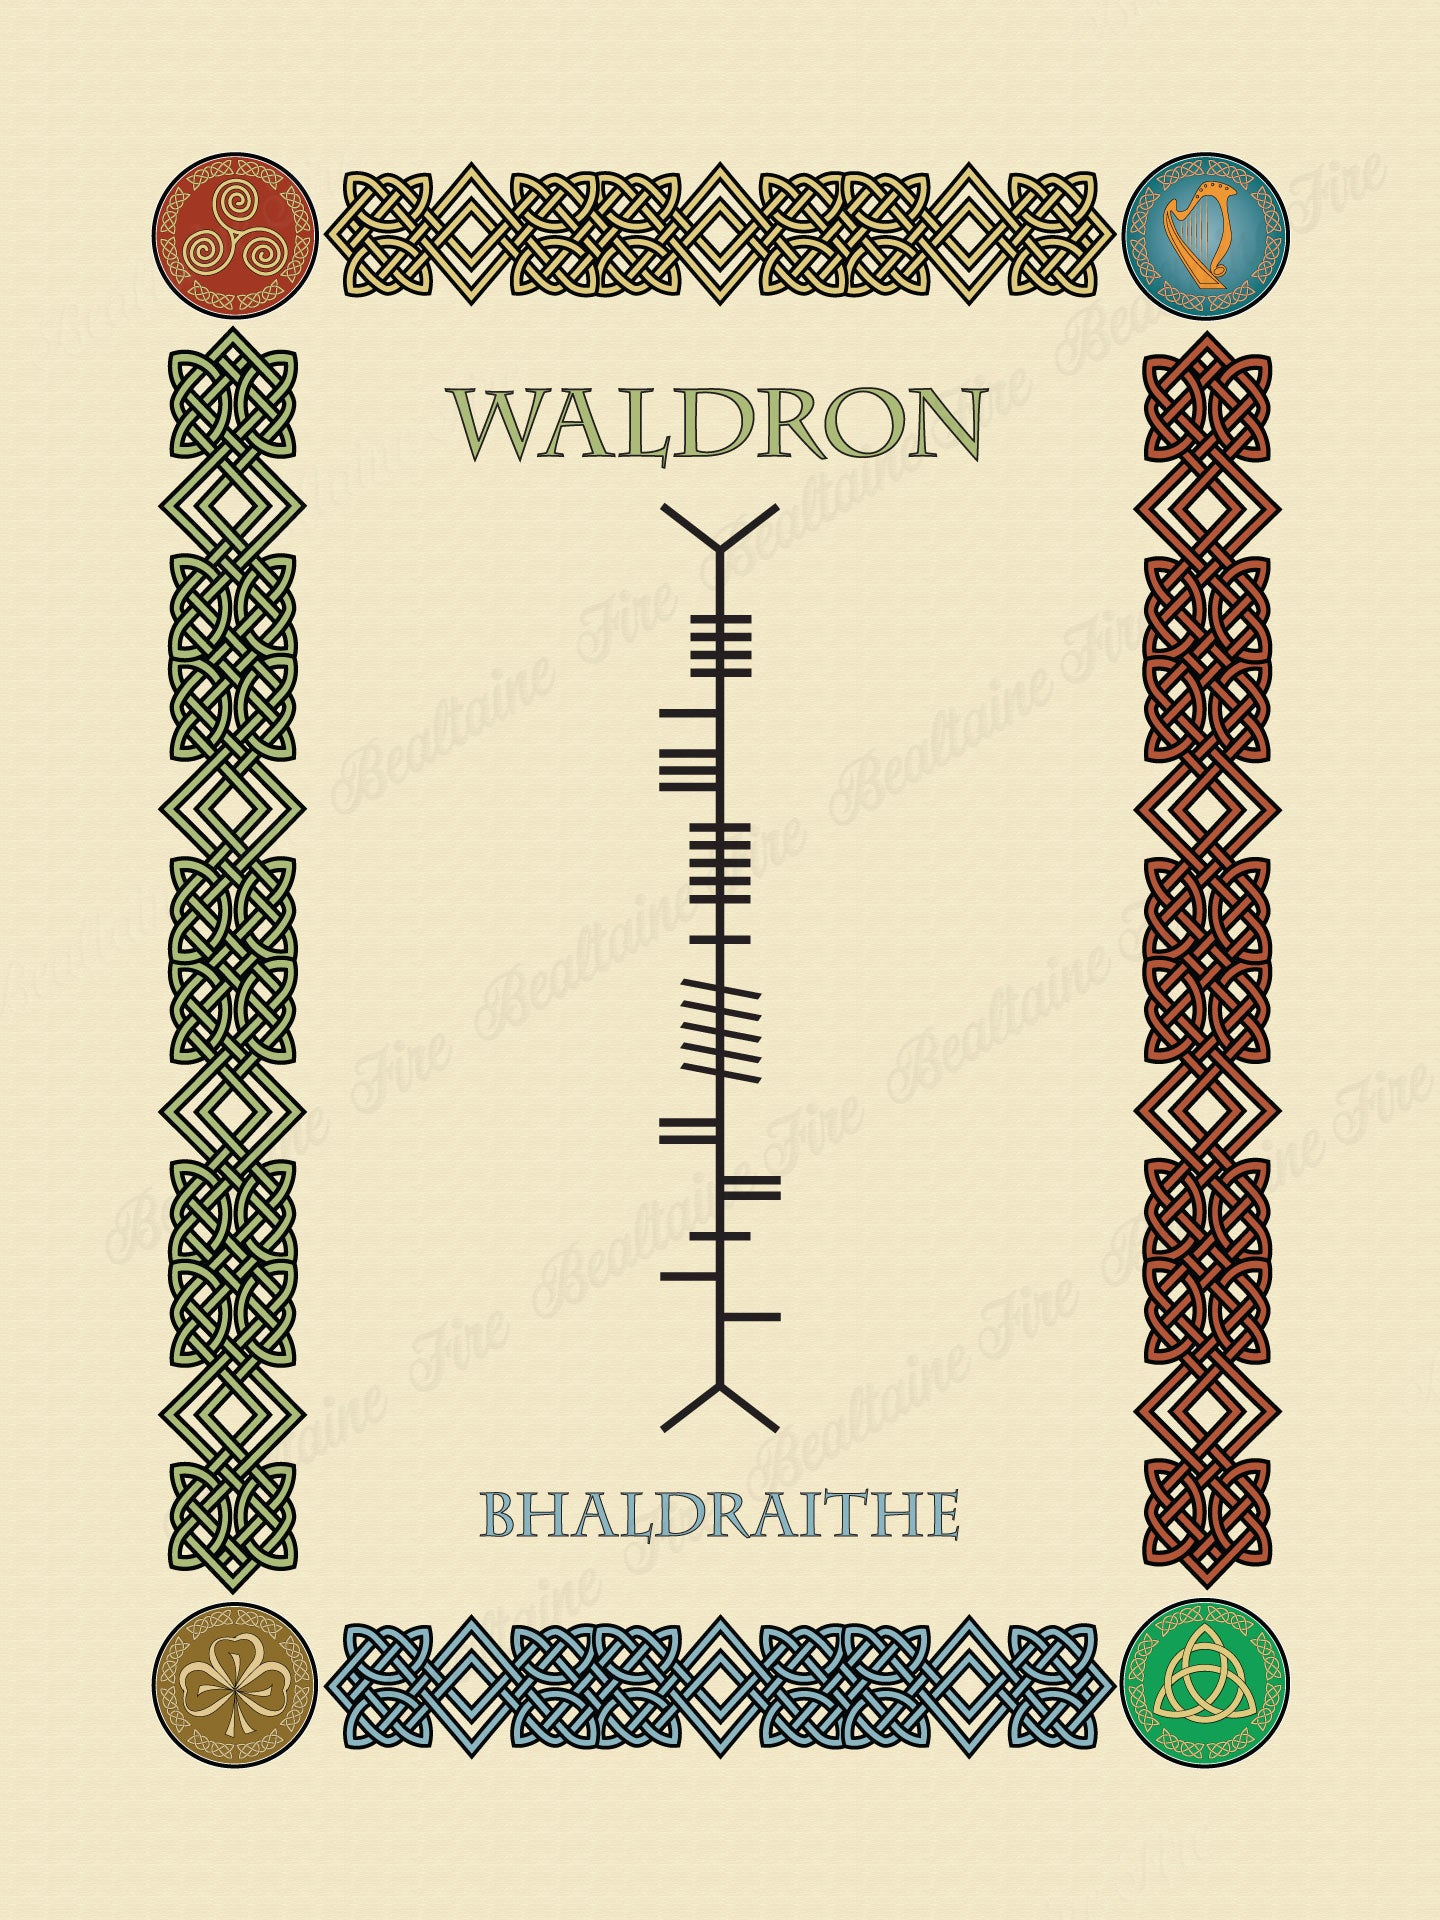 Waldron in Old Irish and Ogham - Premium luster unframed print